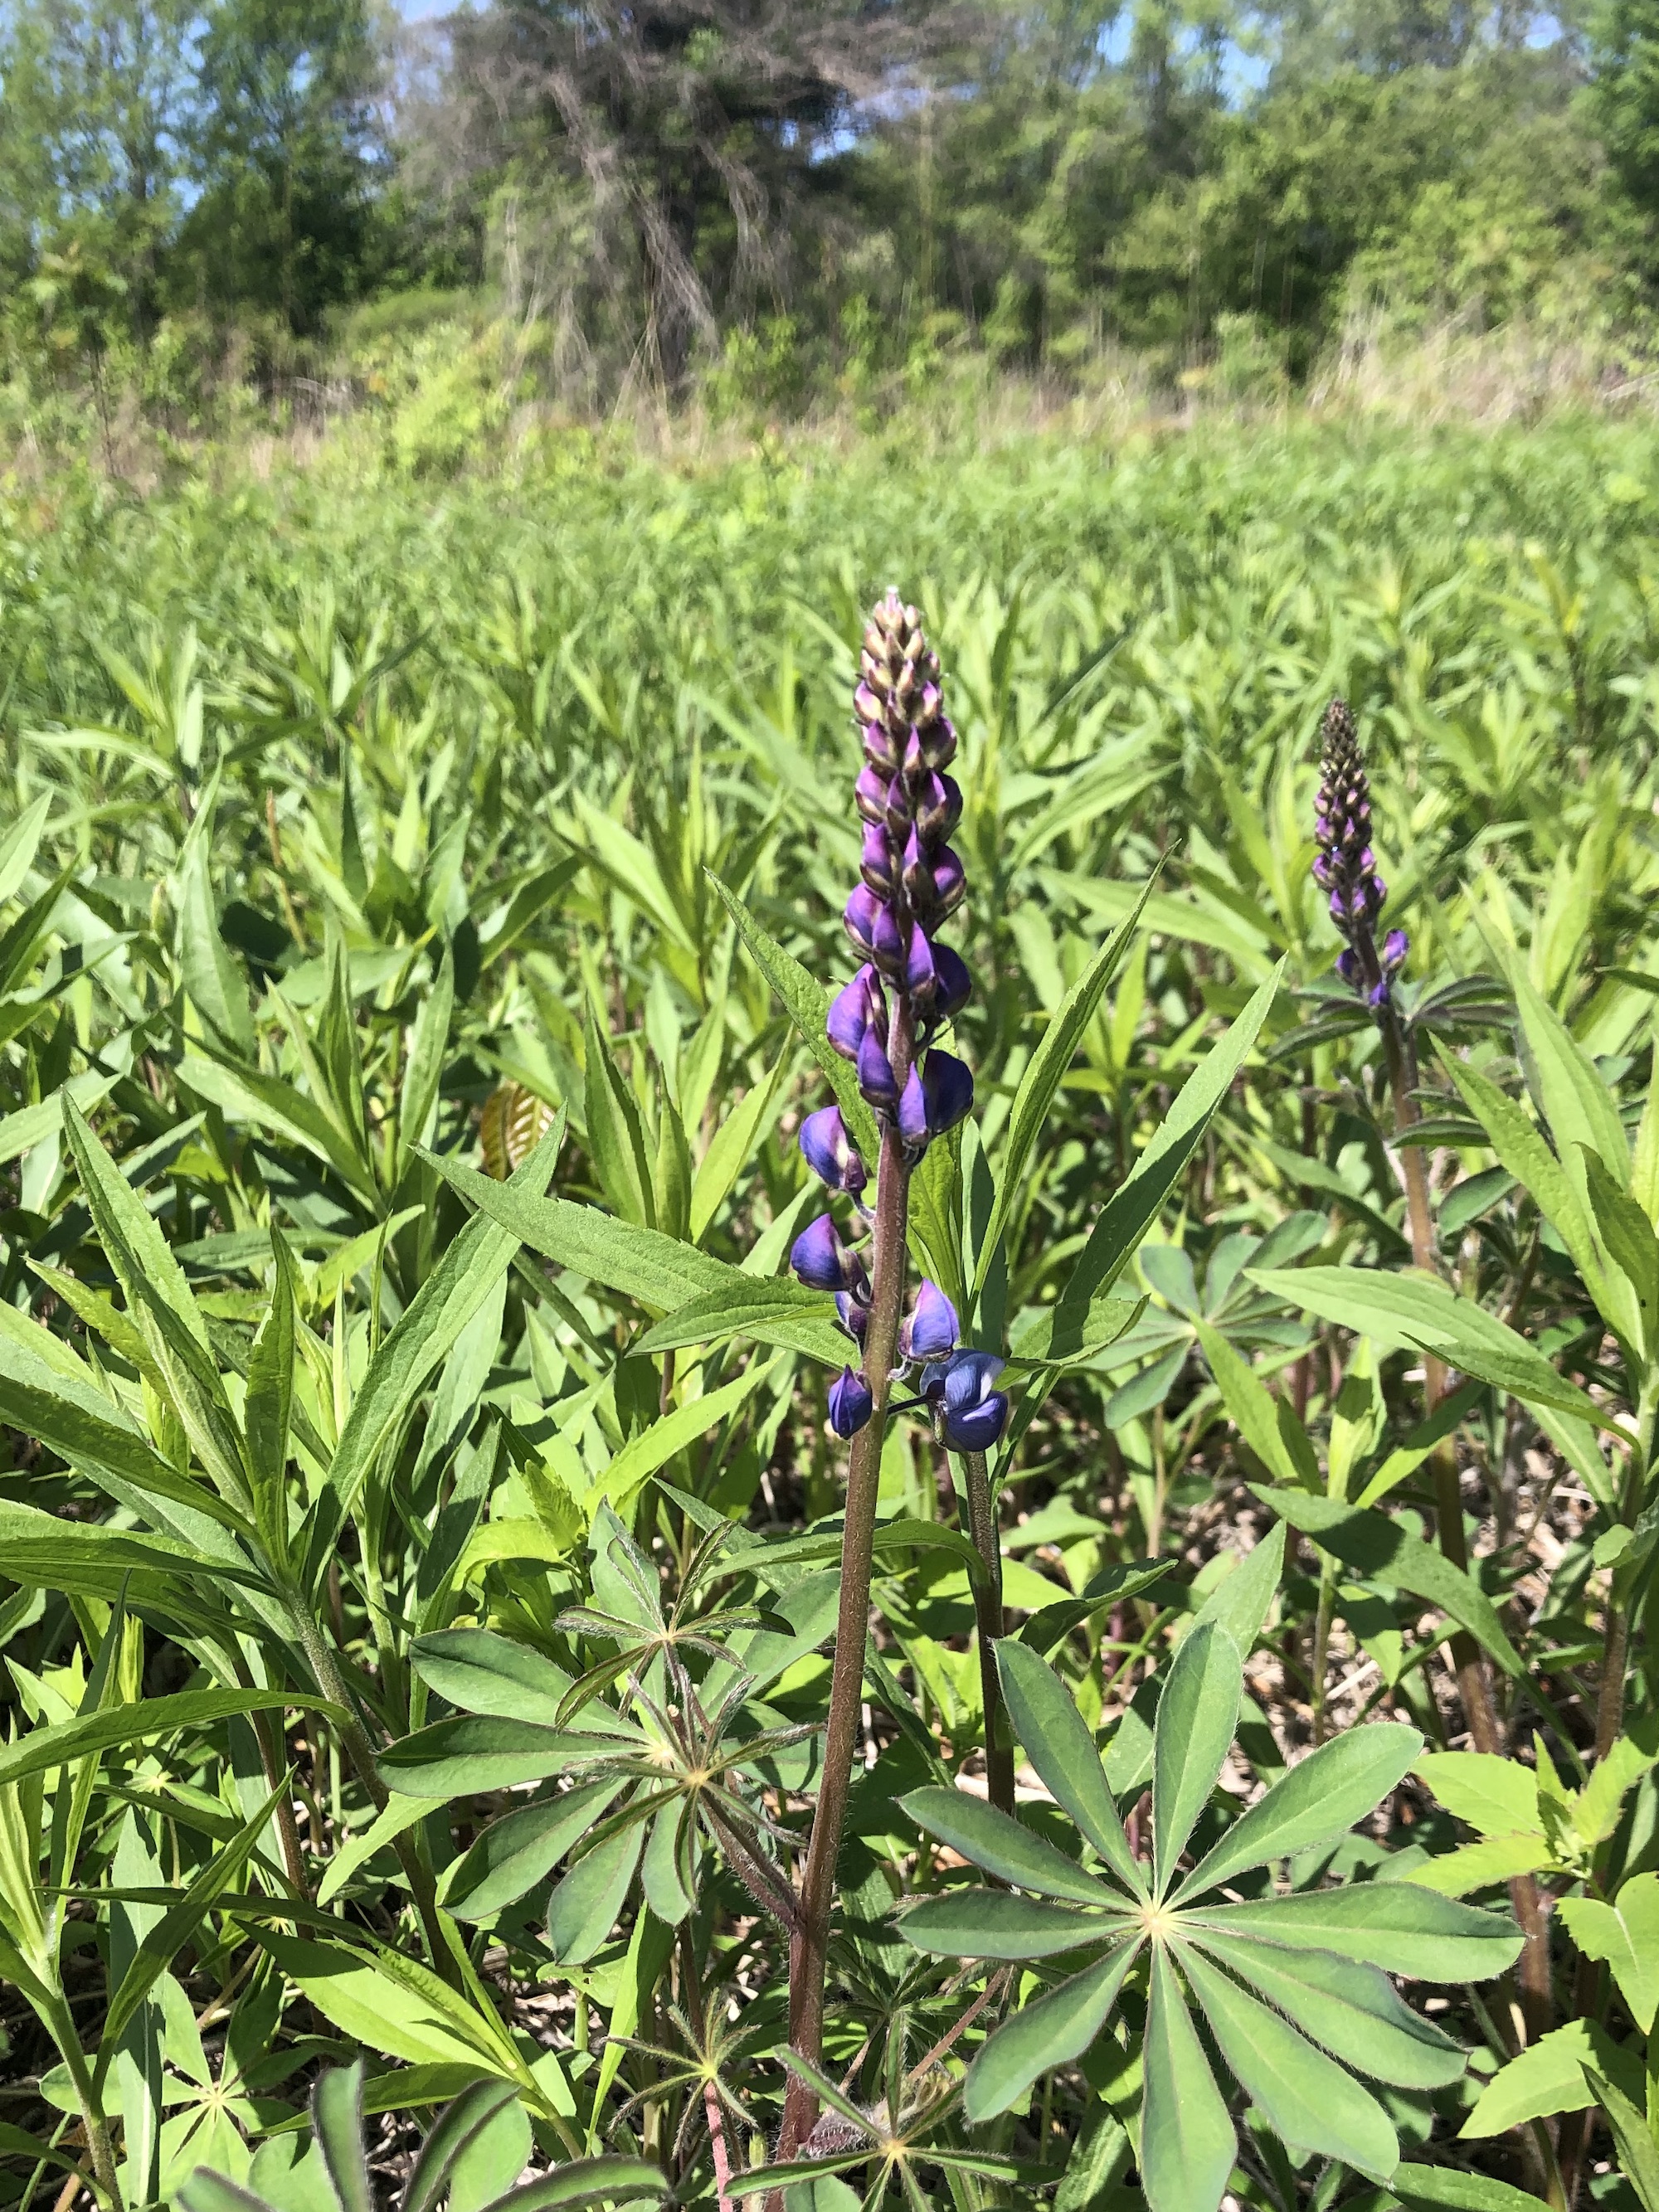 Wild Lupine in the UW-Madison Arboretum Curtis Prairie in Madison, Wisconsin on May 22, 2021.